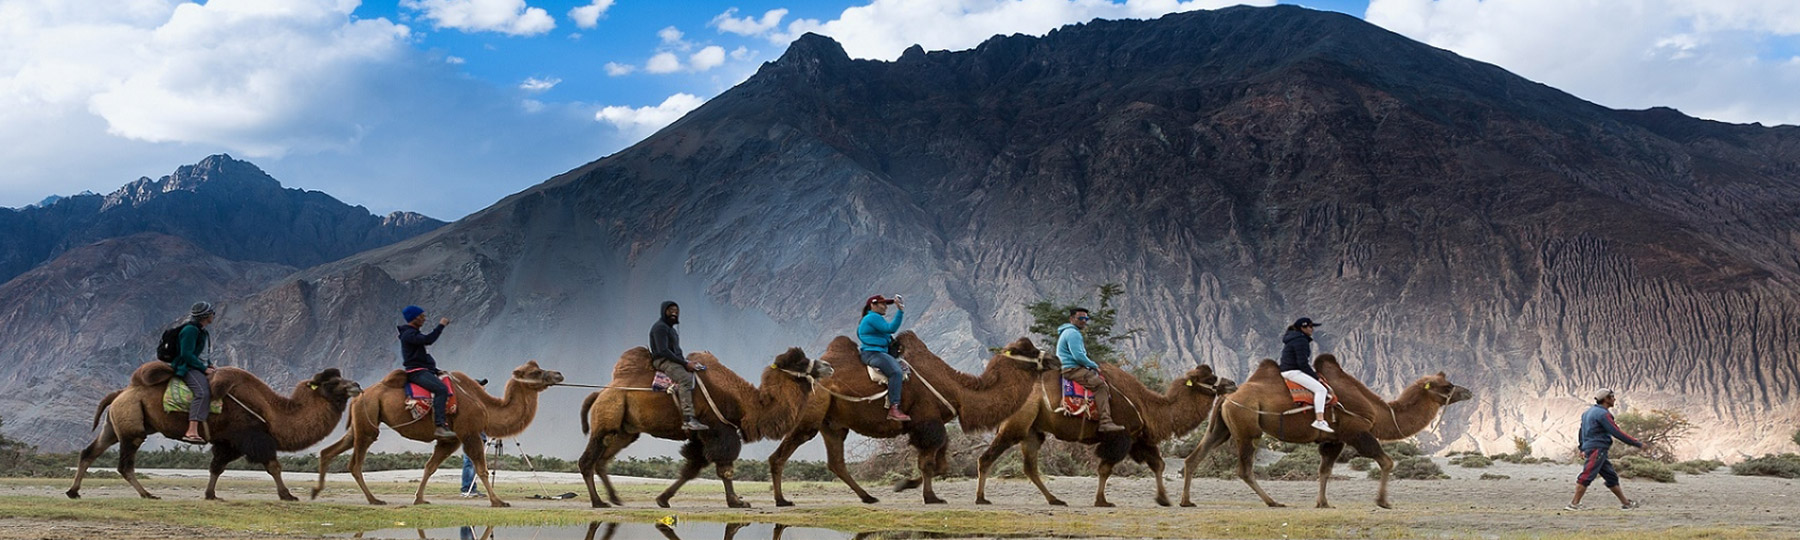 Nubra Valley Tour Packages  Nubra Valley Holiday Packages